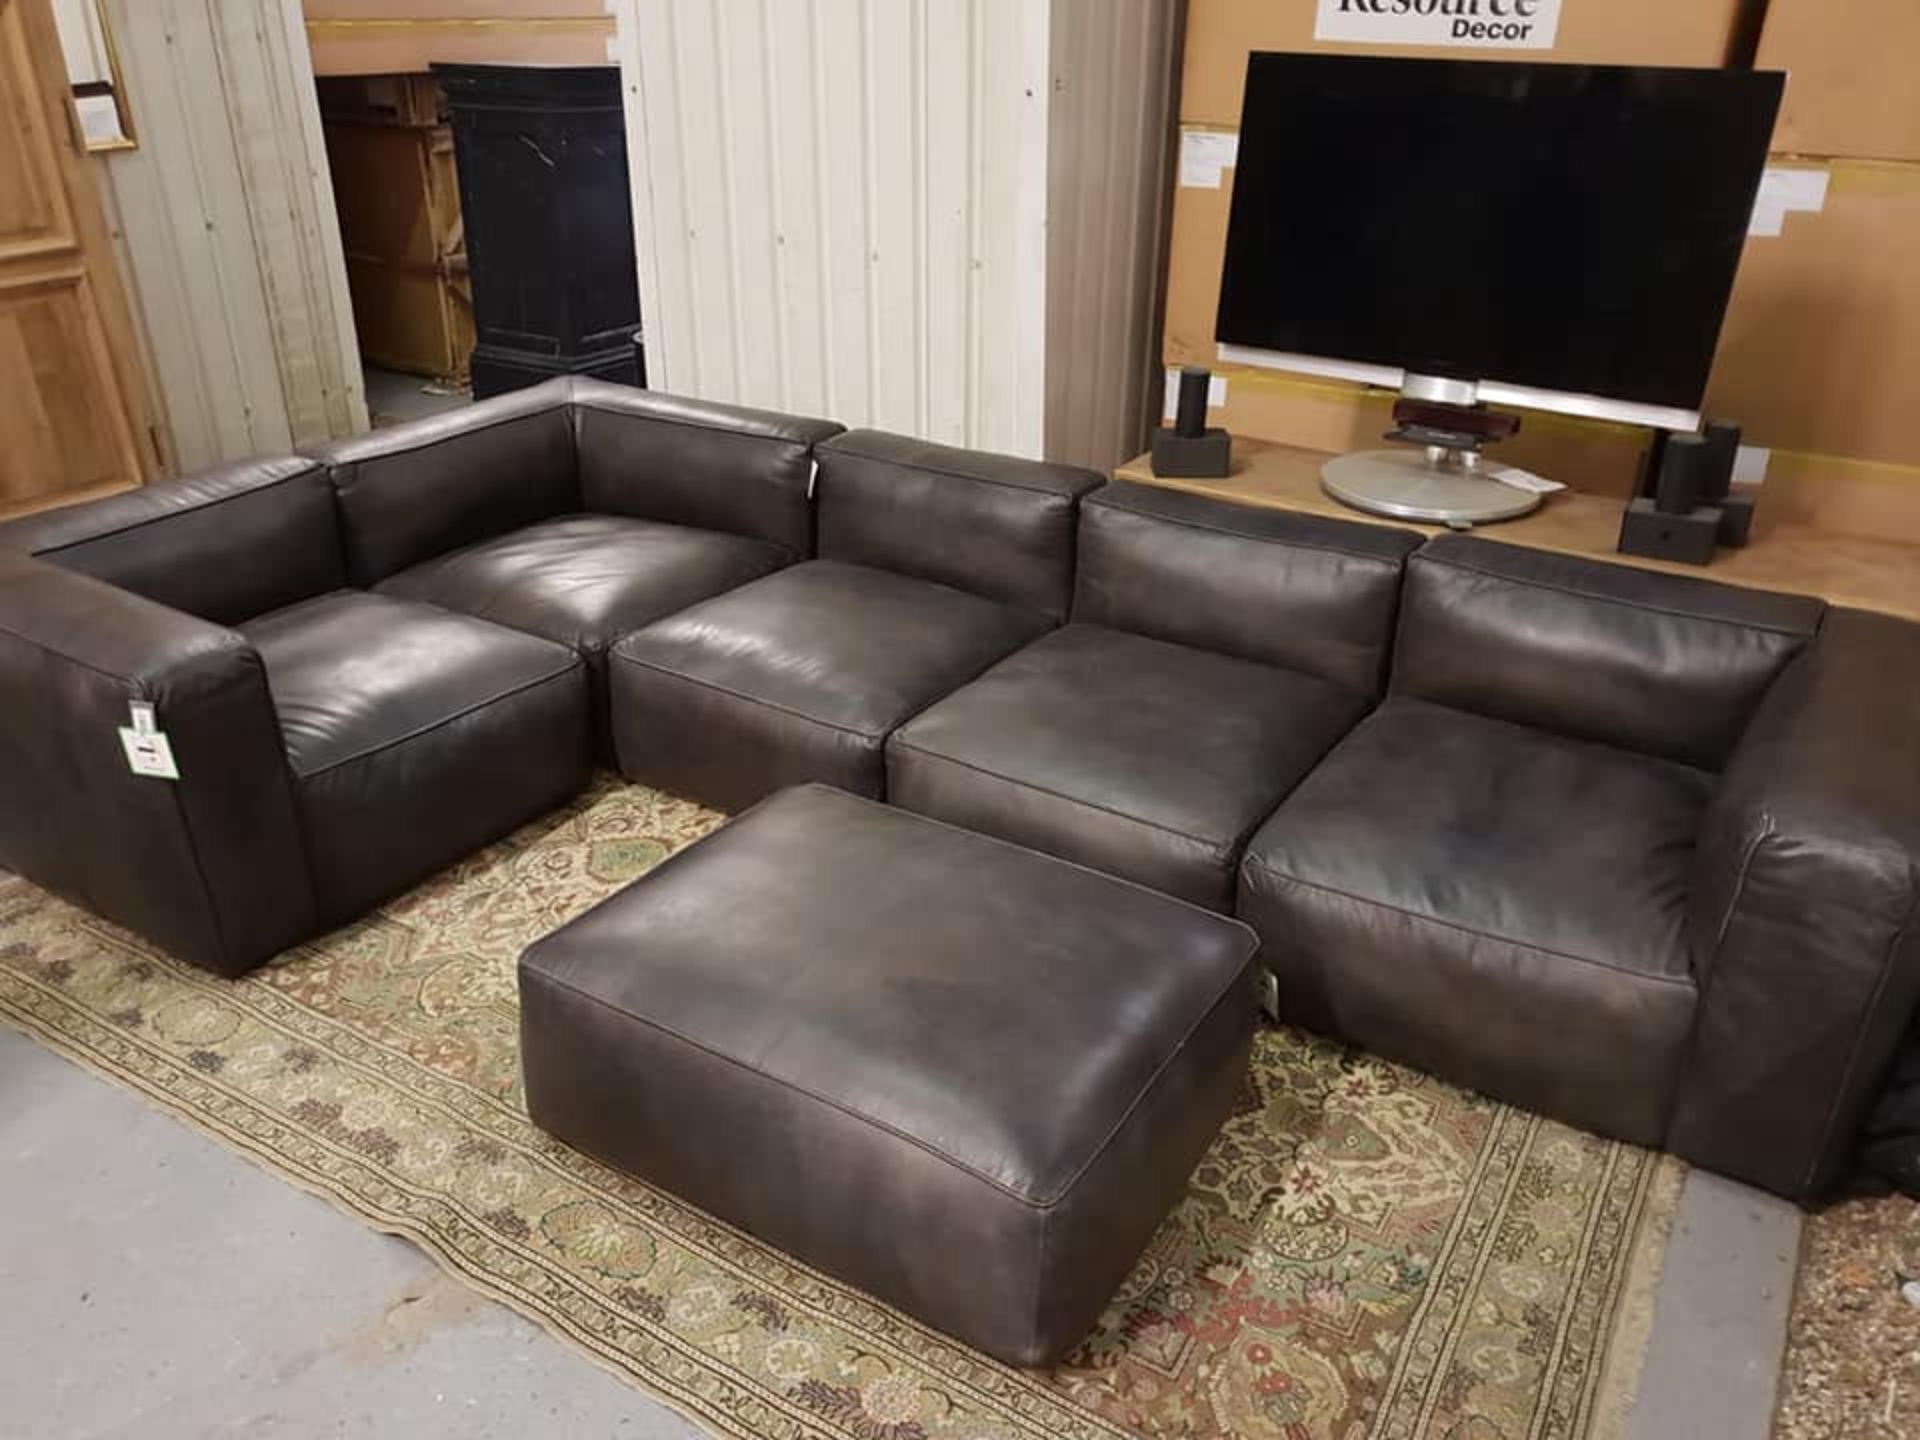 Tribeca Sectional Sofa Suite with footstool - Black Leather Cool with simple lines and fantastic